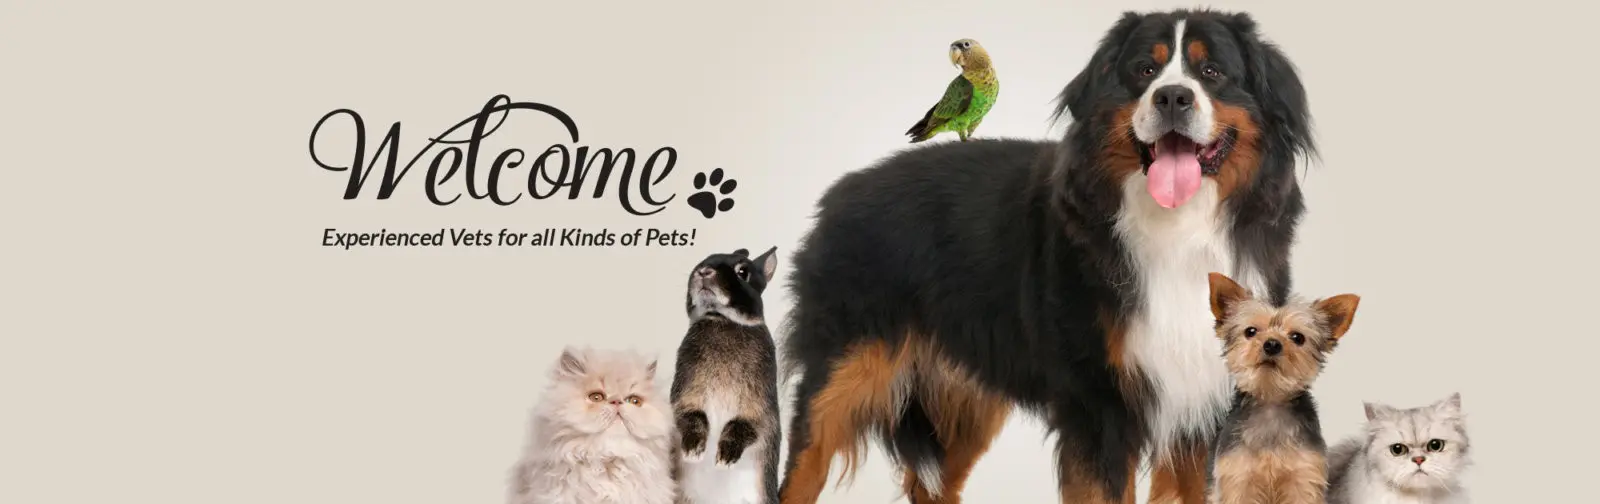 Welcome - Experienced Vets for all Kinds of Pets!